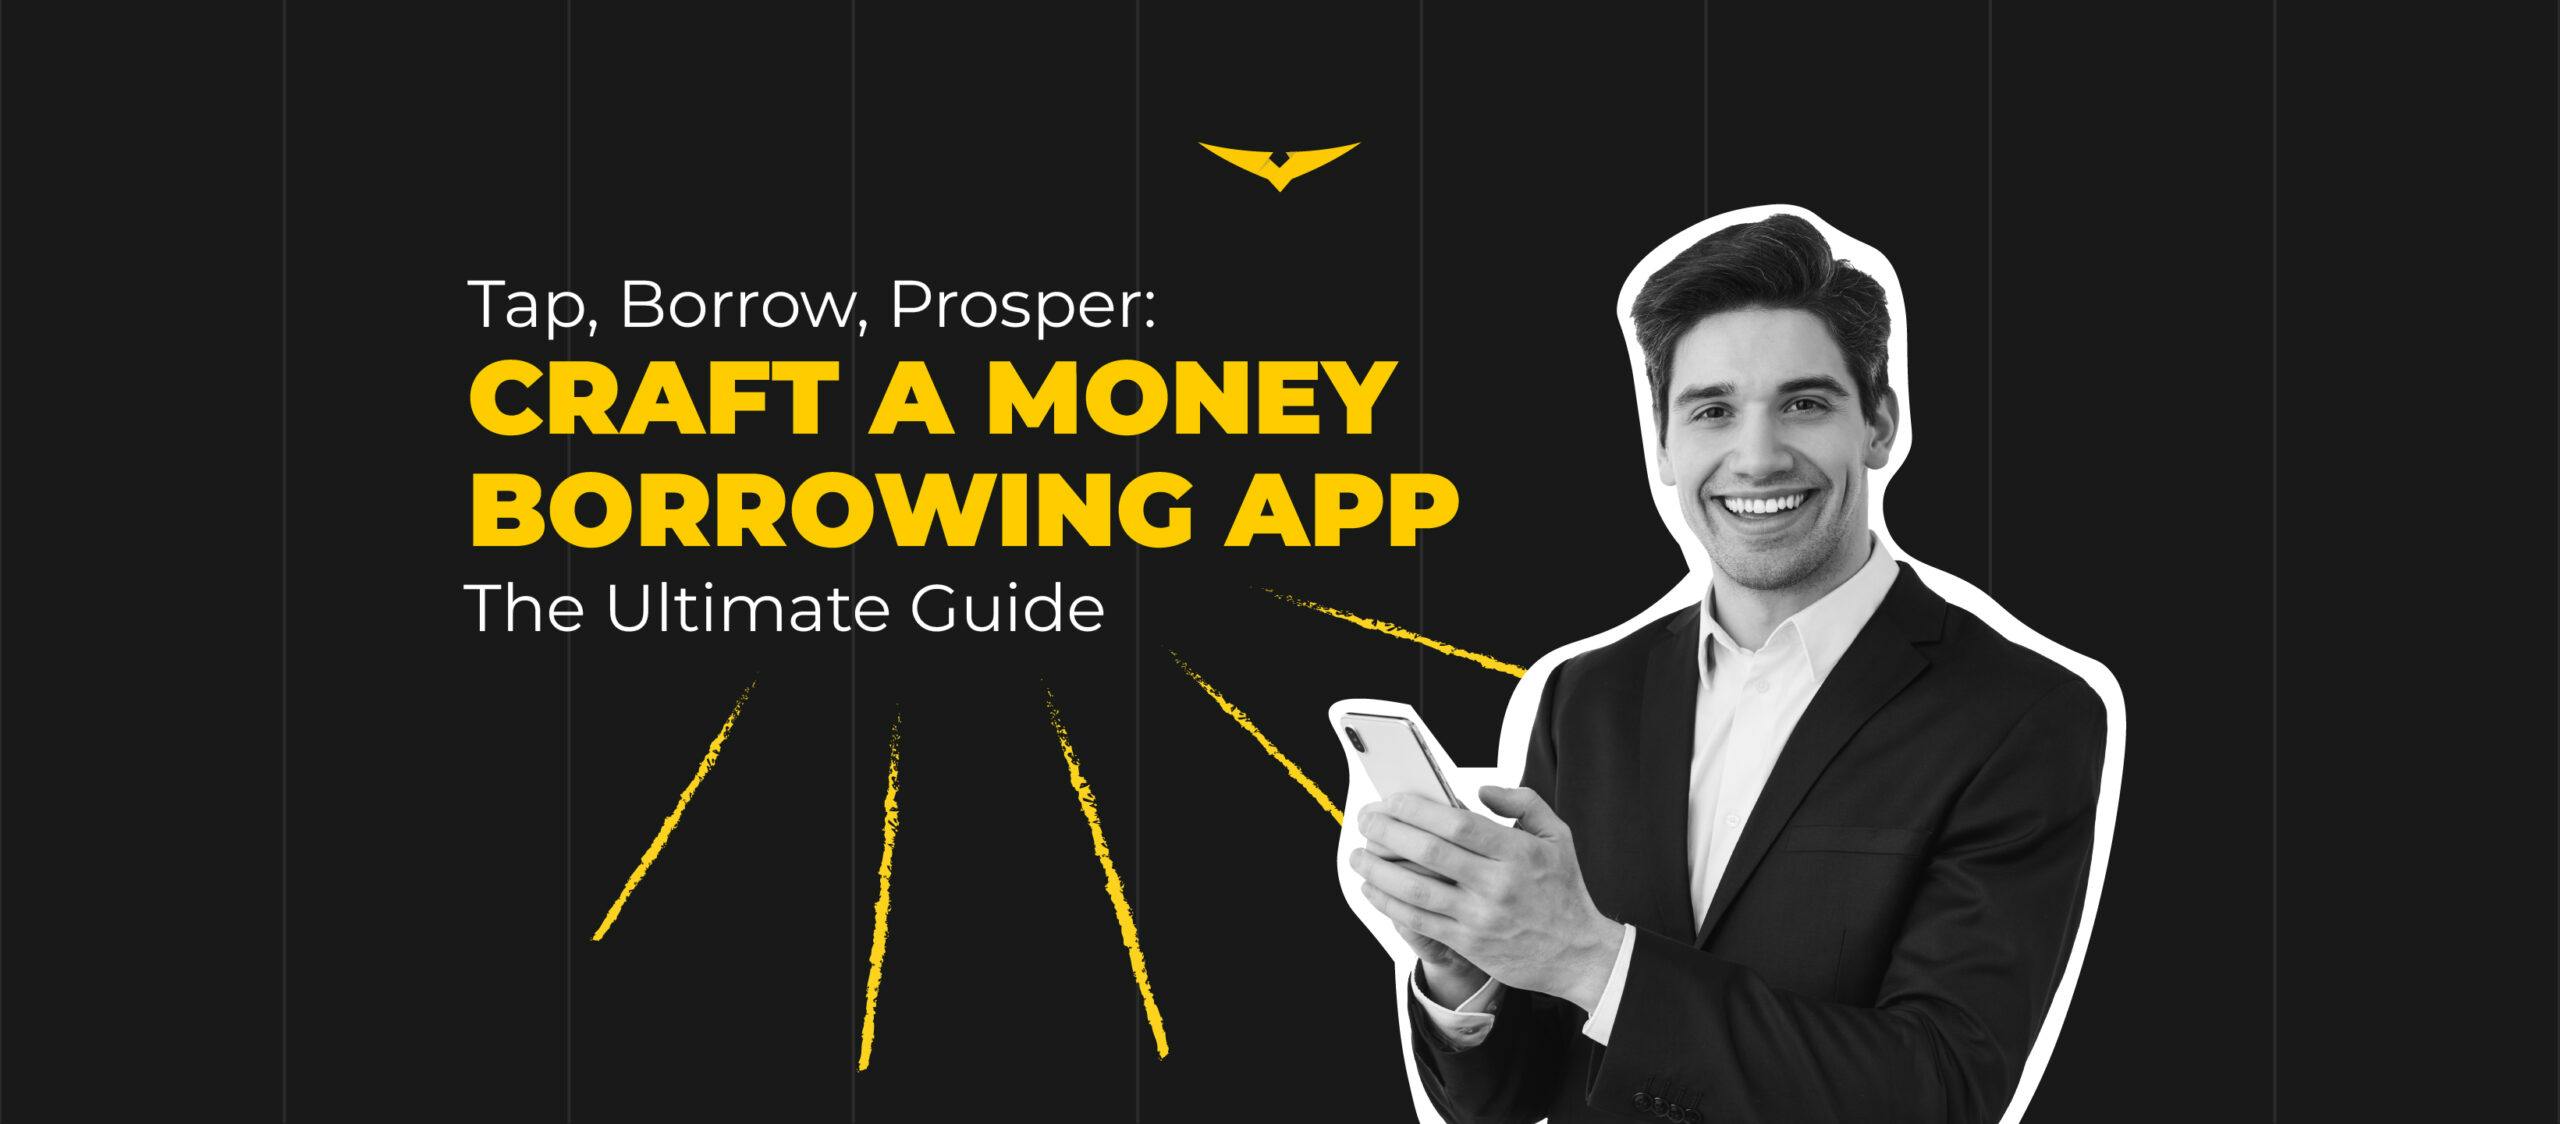 Tap, Borrow, Prosper: The Ultimate Guide to Crafting a Money-Borrowing App